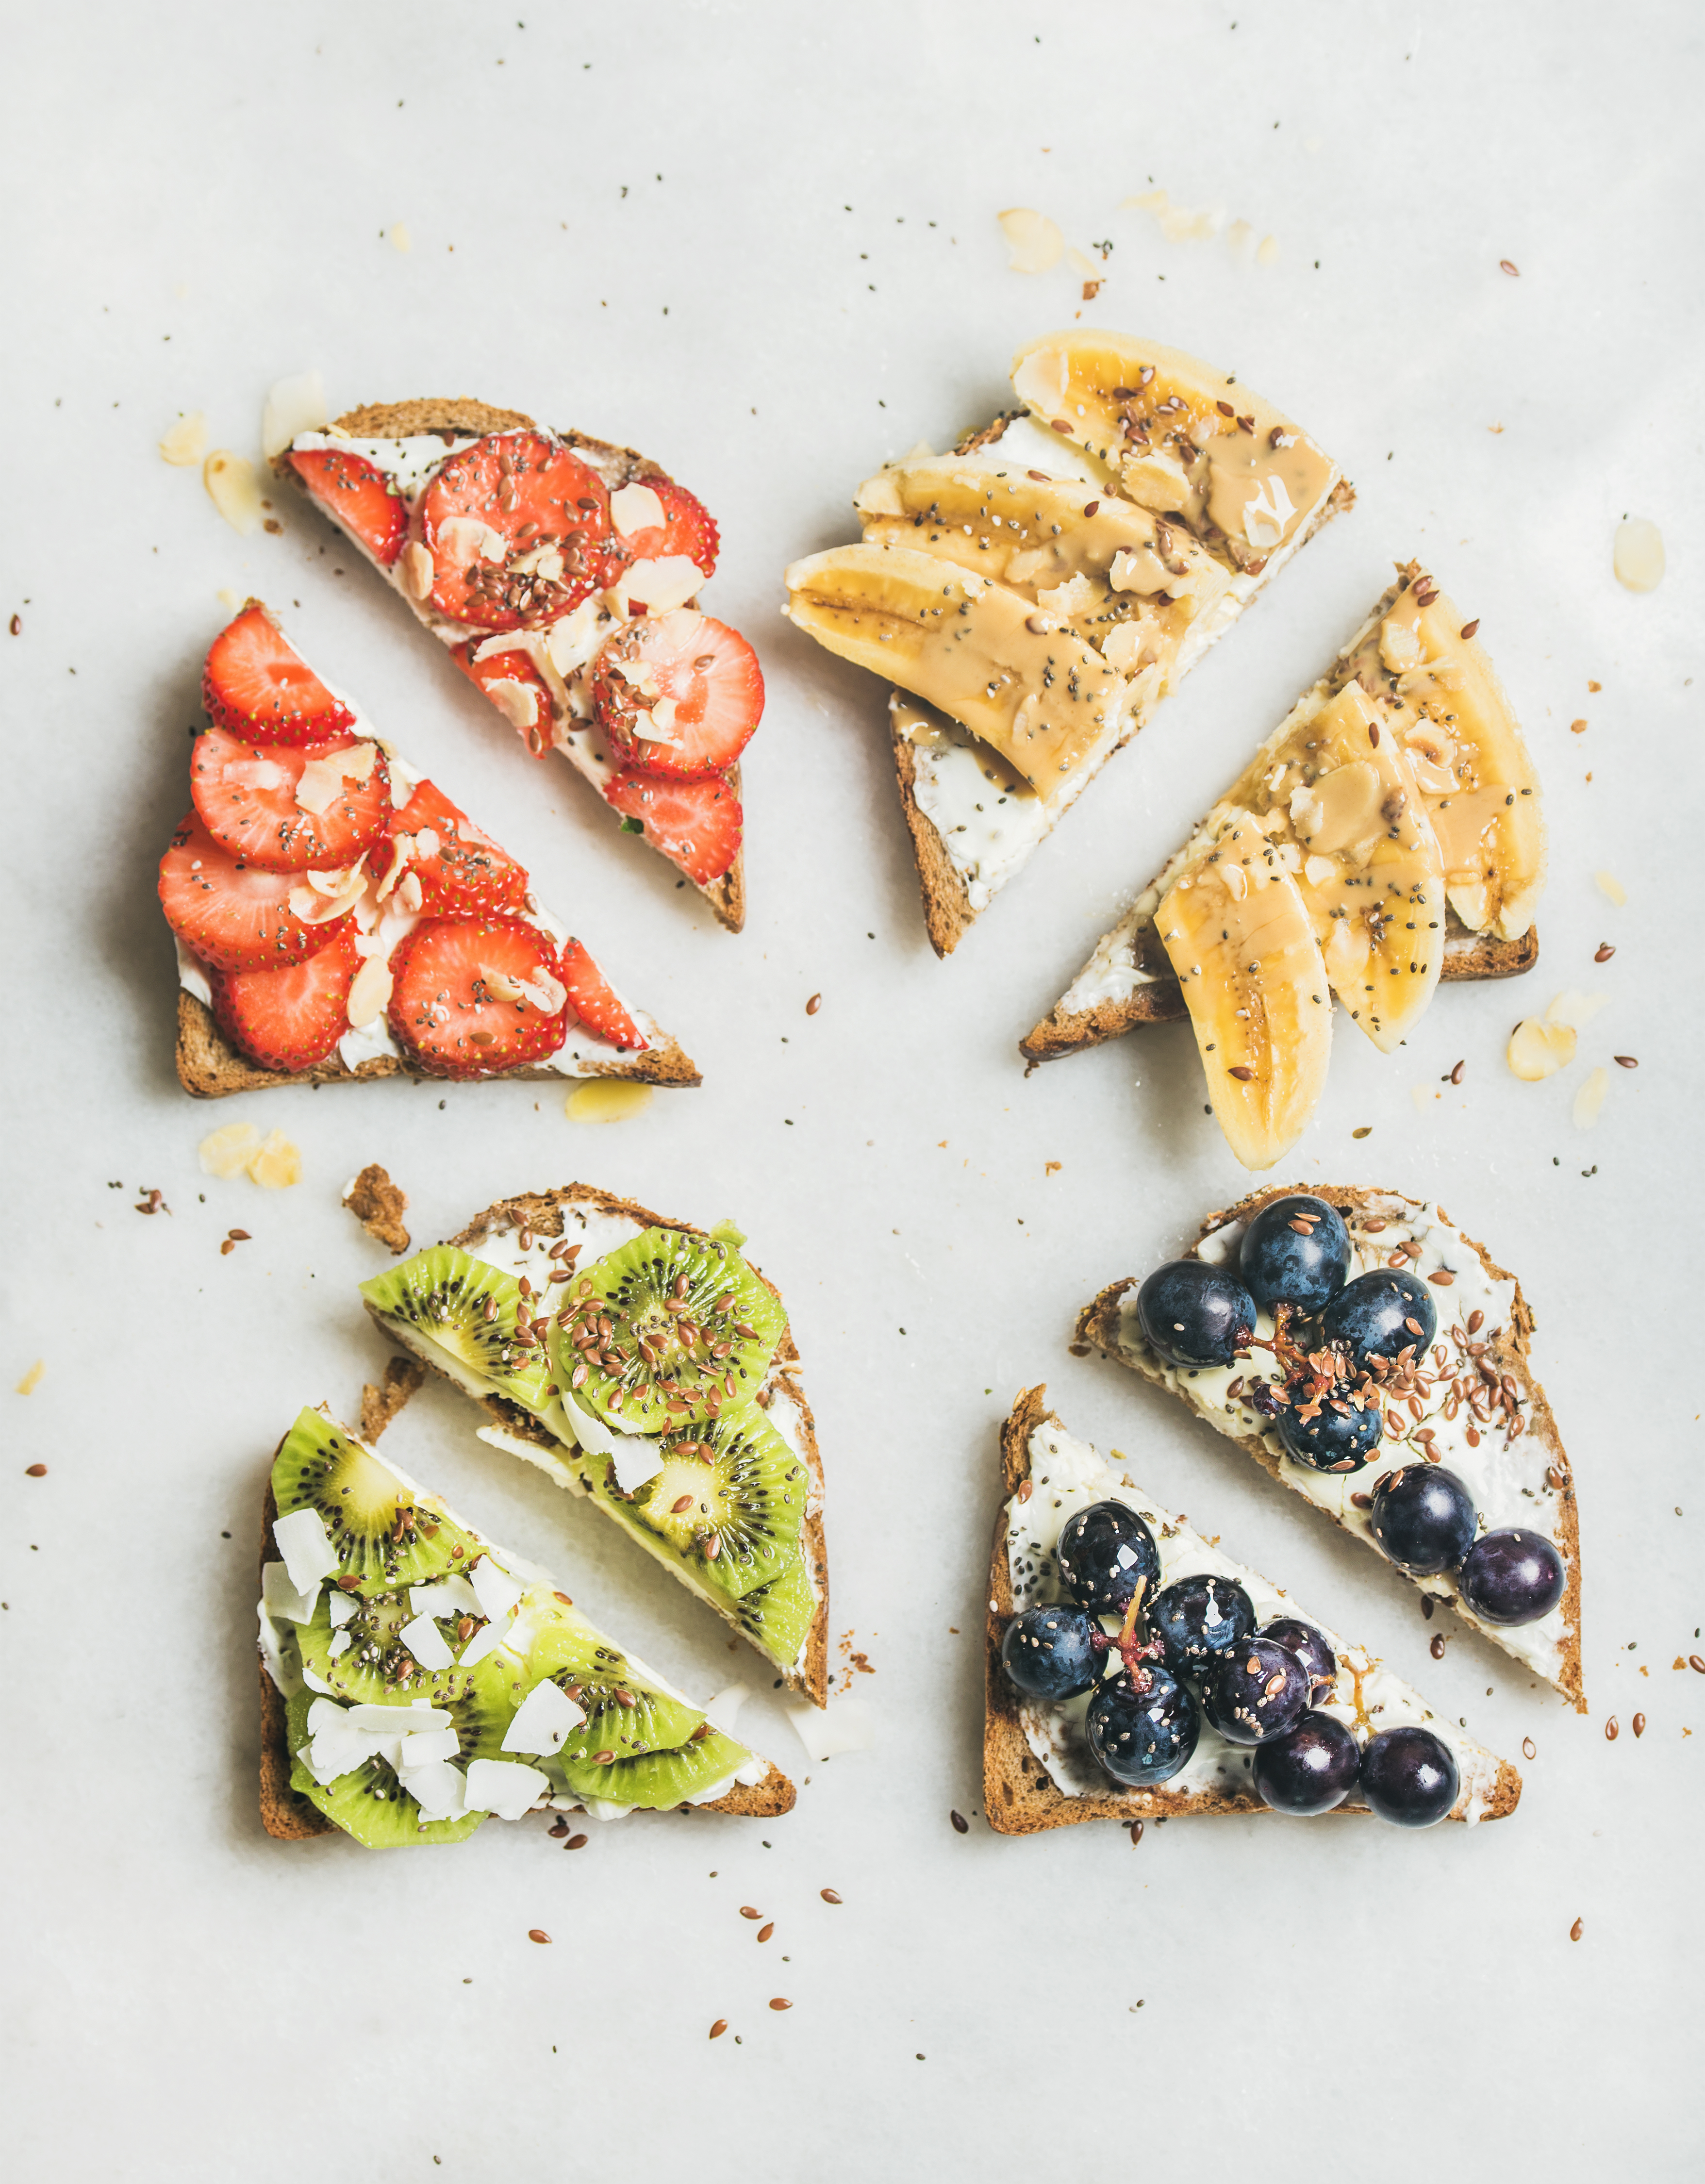 Healthy breakfast wholegrain toasts with cream cheese, various fruit, seeds and nuts. Top view, grey marble background. Clean eating, vegetarian, dieting, healthy lifestyle concept